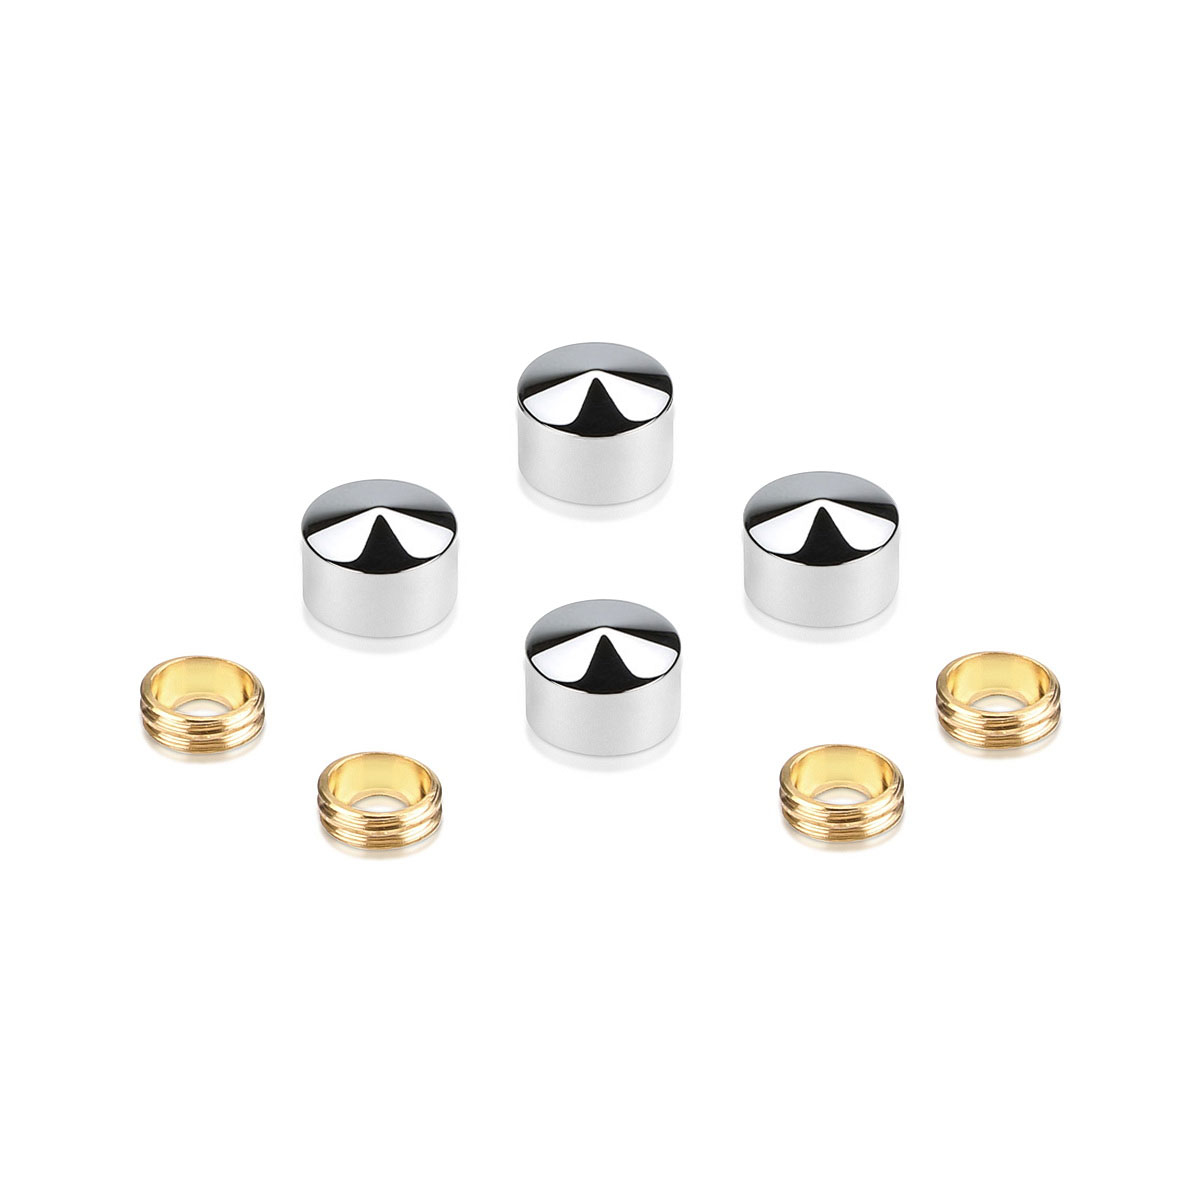 Set of Conical Screw Cover Diameter 1/2'', Polished Stainless Steel Finish (Indoor Use Only)